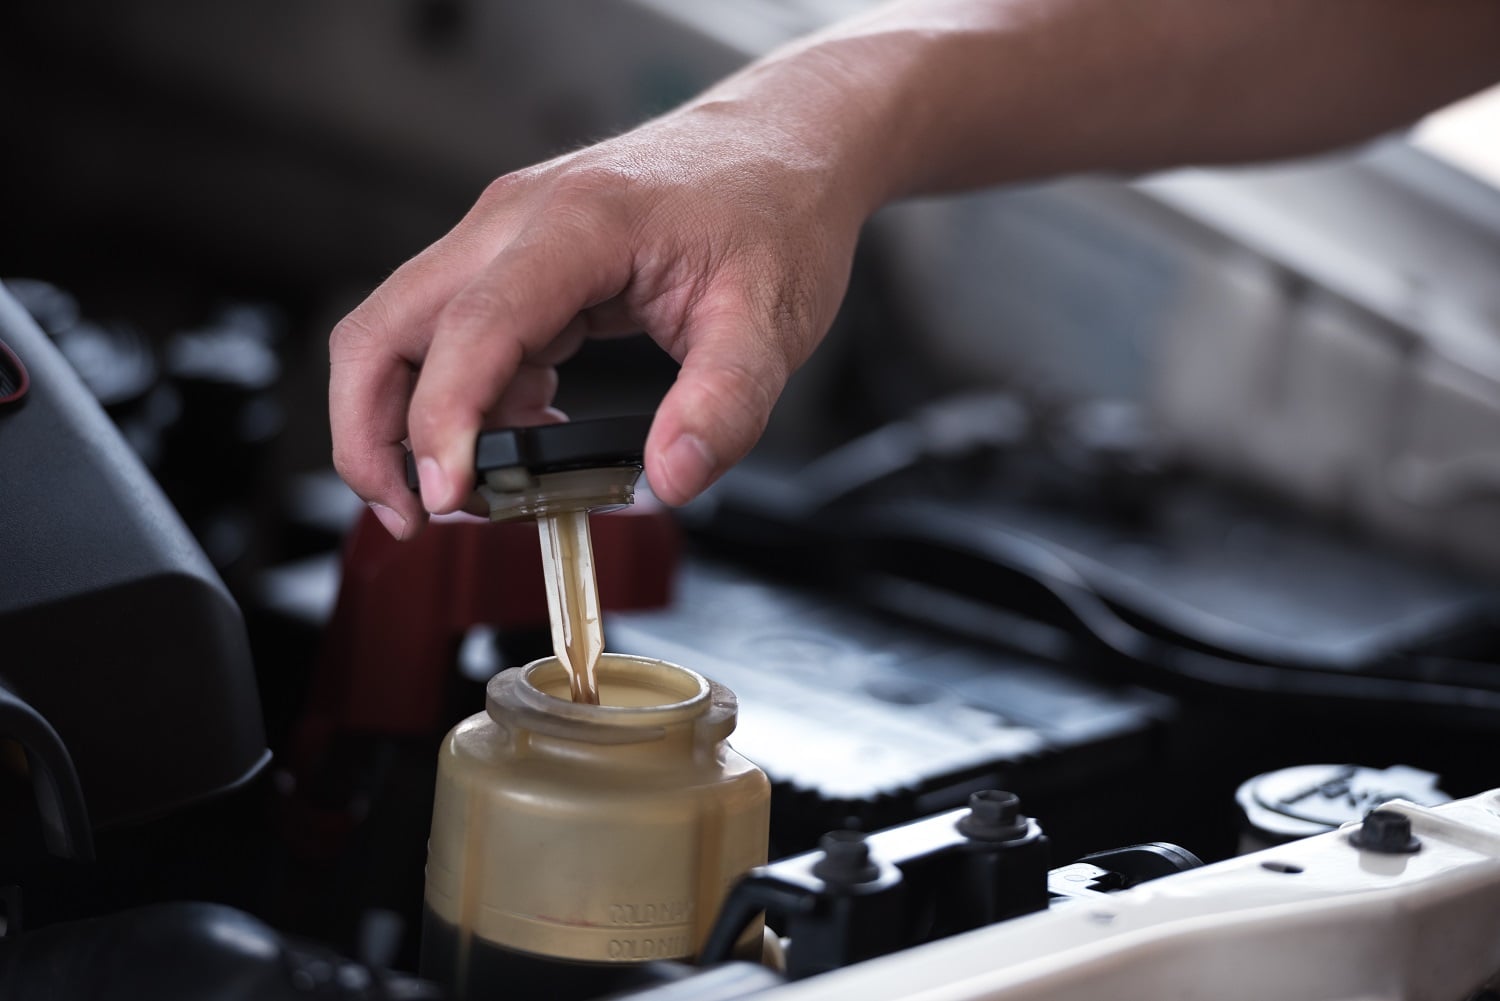 Power Steering Fluid Noise: What Causes It and How to Fix